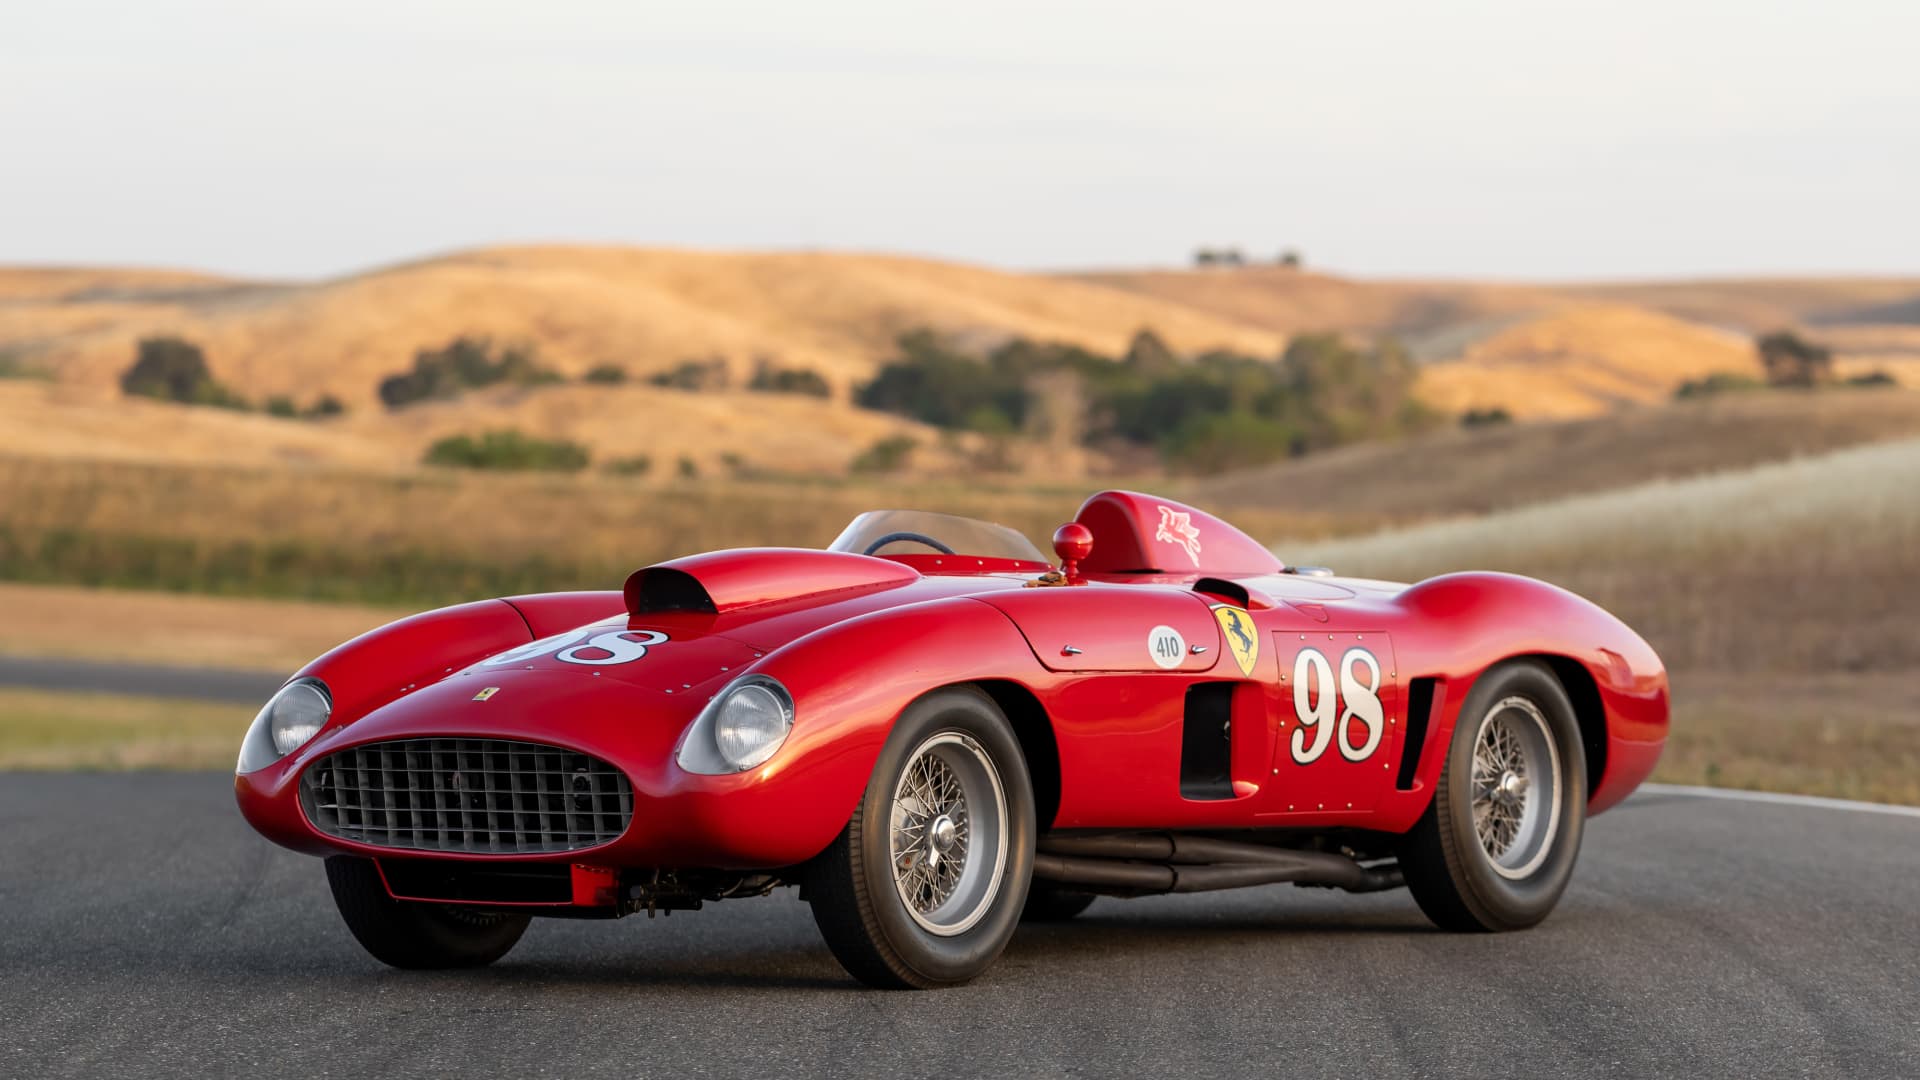 The 5 most expensive cars up for sale at Pebble Beach this weekend